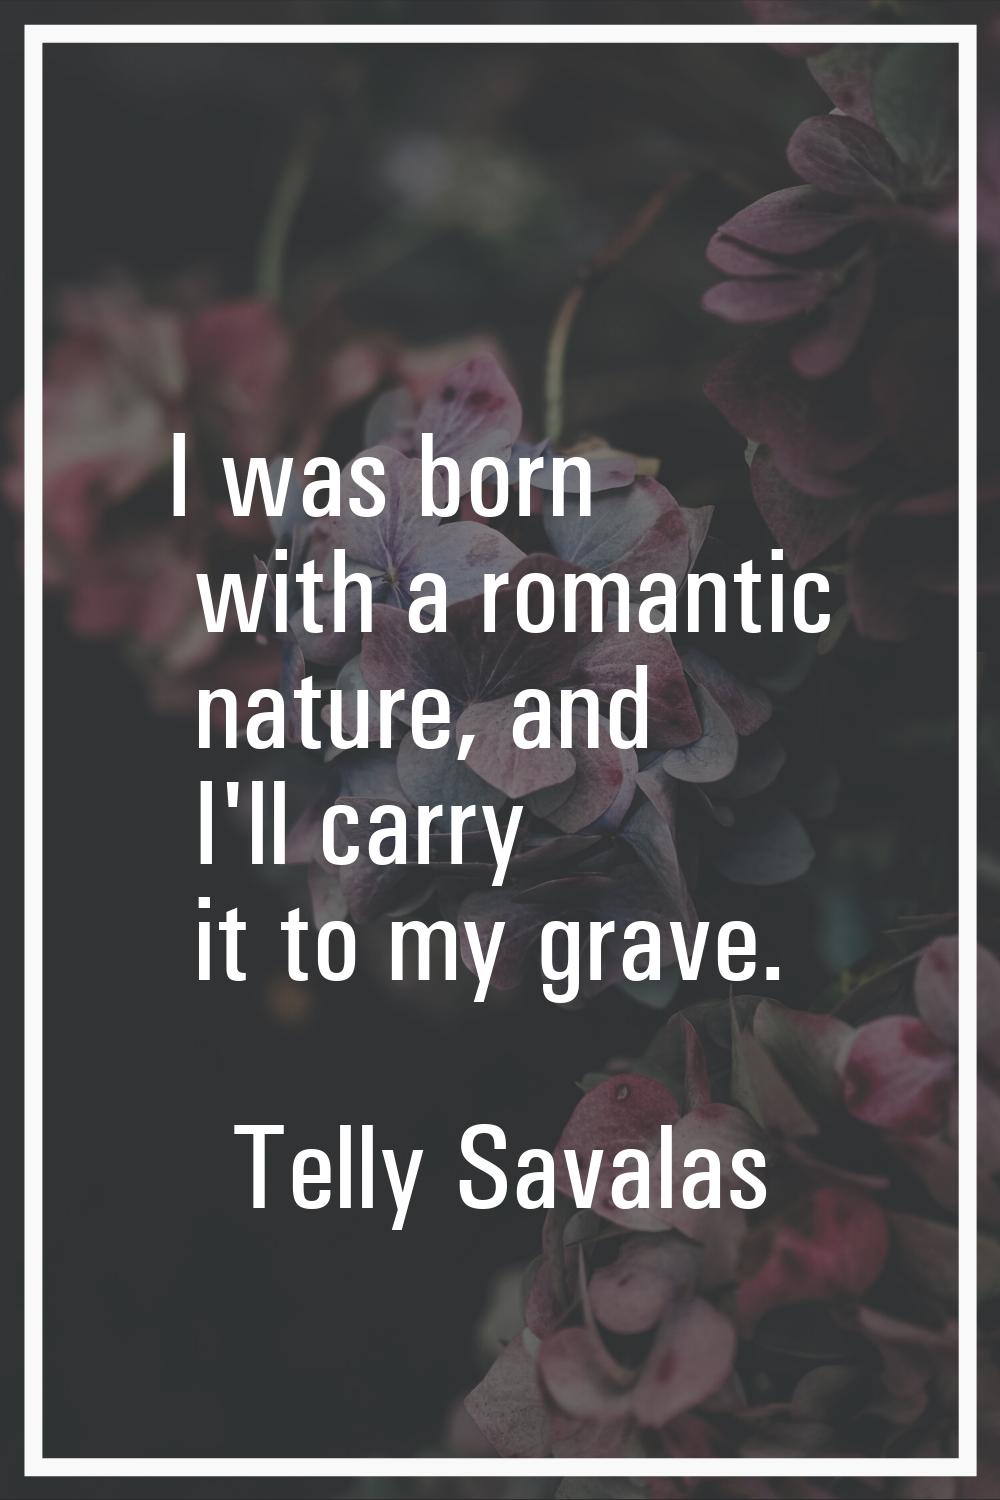 I was born with a romantic nature, and I'll carry it to my grave.